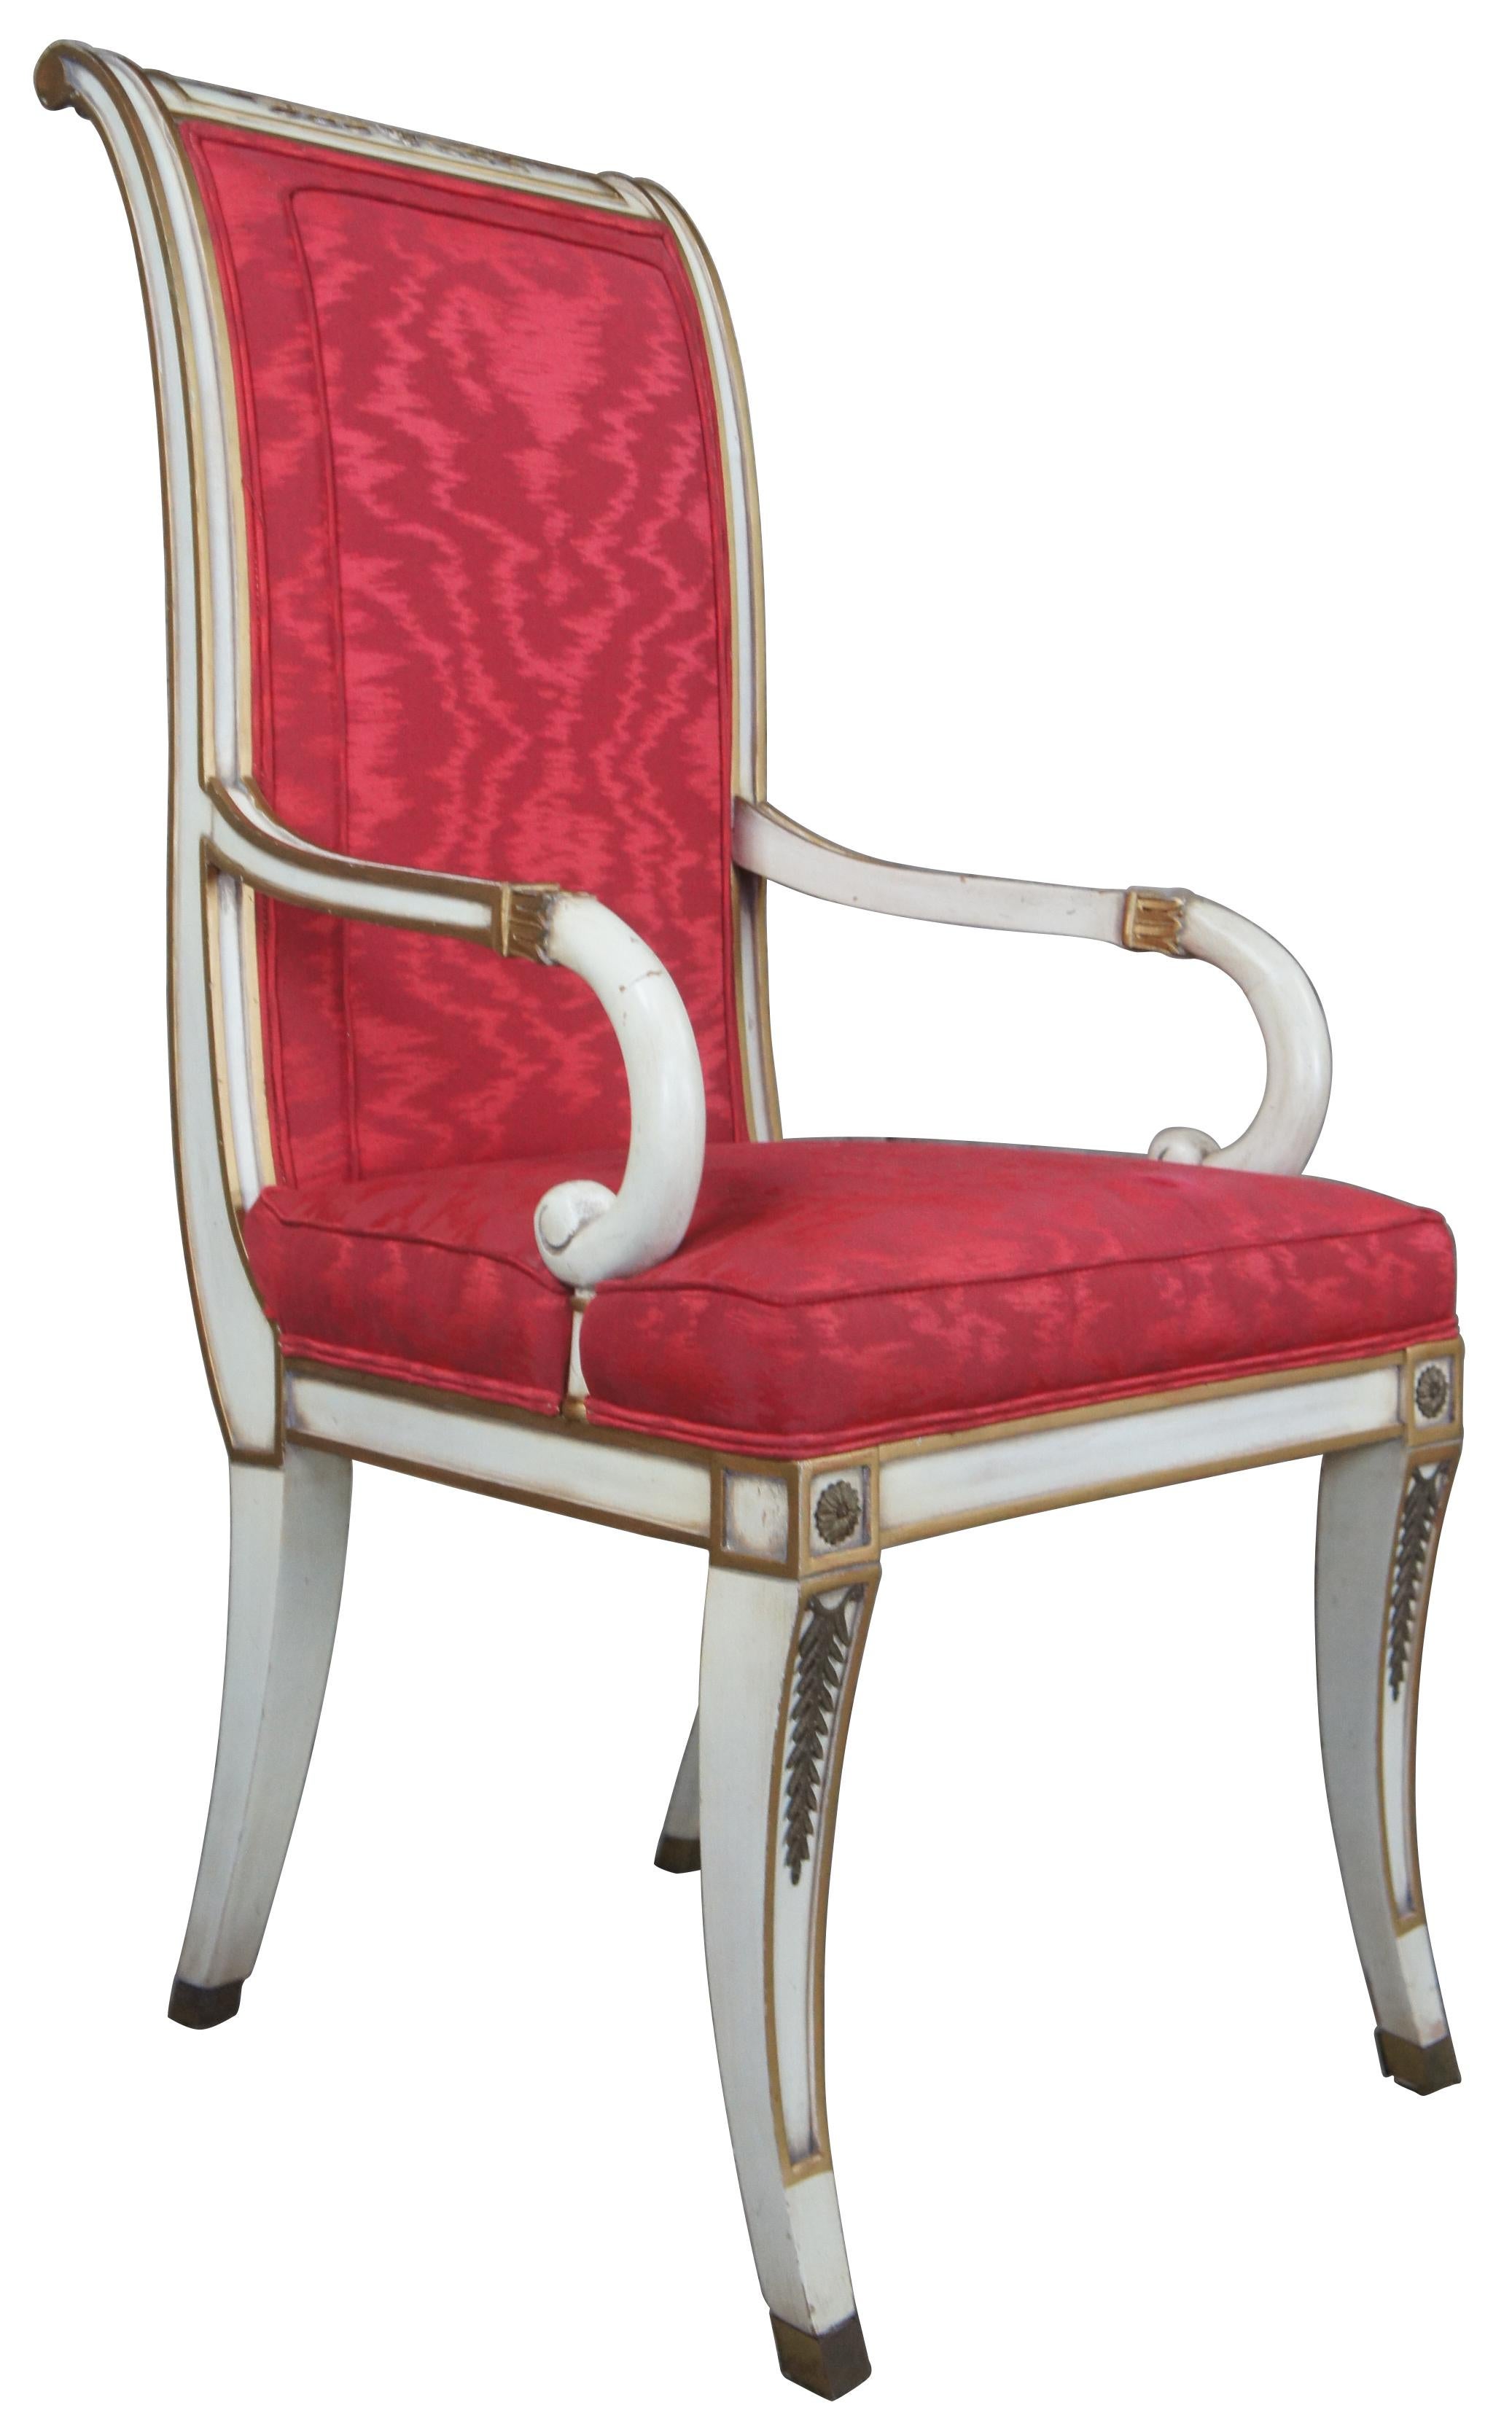 2 Karges French Empire Regency Klismos Dining Arm Chairs Provincial In Good Condition For Sale In Dayton, OH